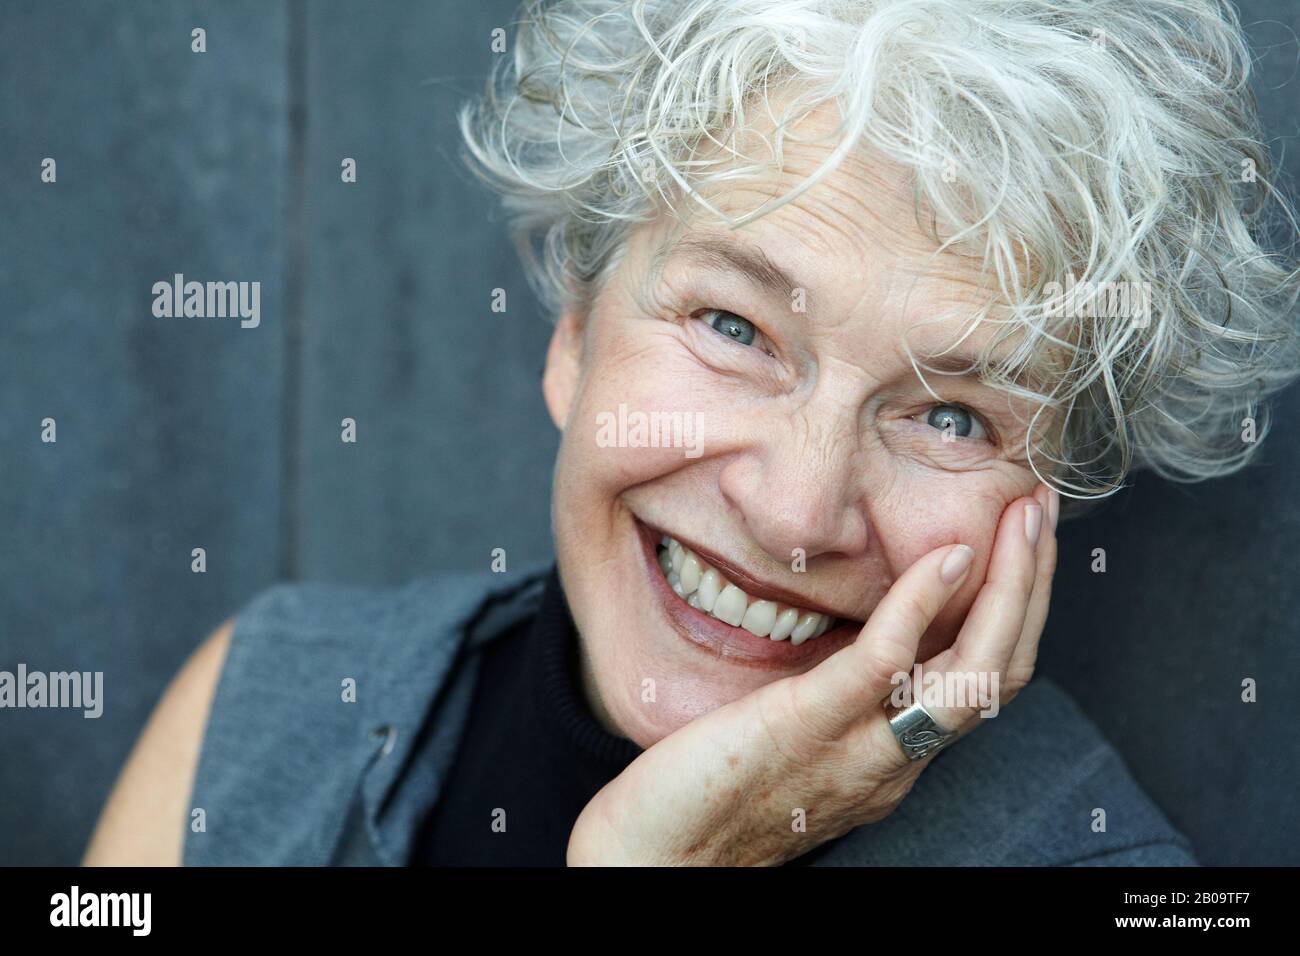 Happy, smiling 65 year old woman Stock Photo